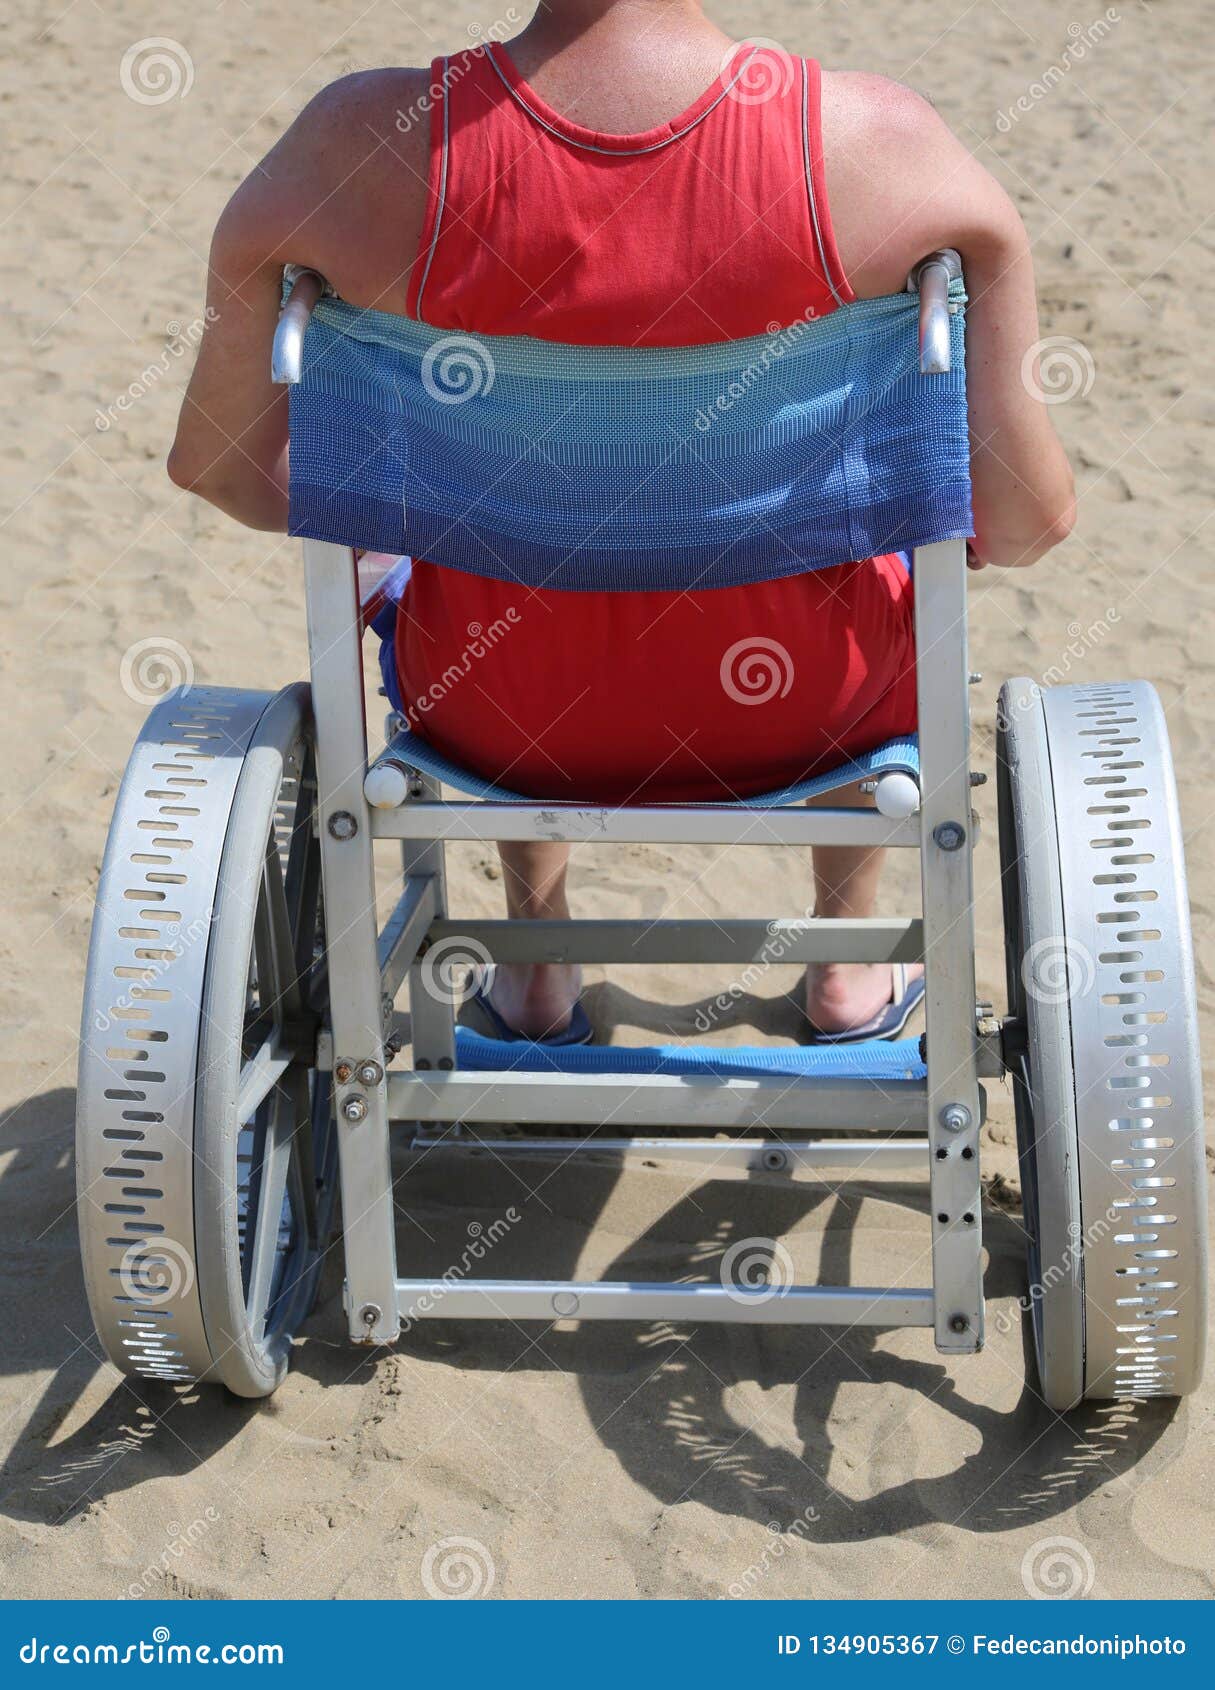 disabled man with undershirt on the wheelchair in the sandy beac